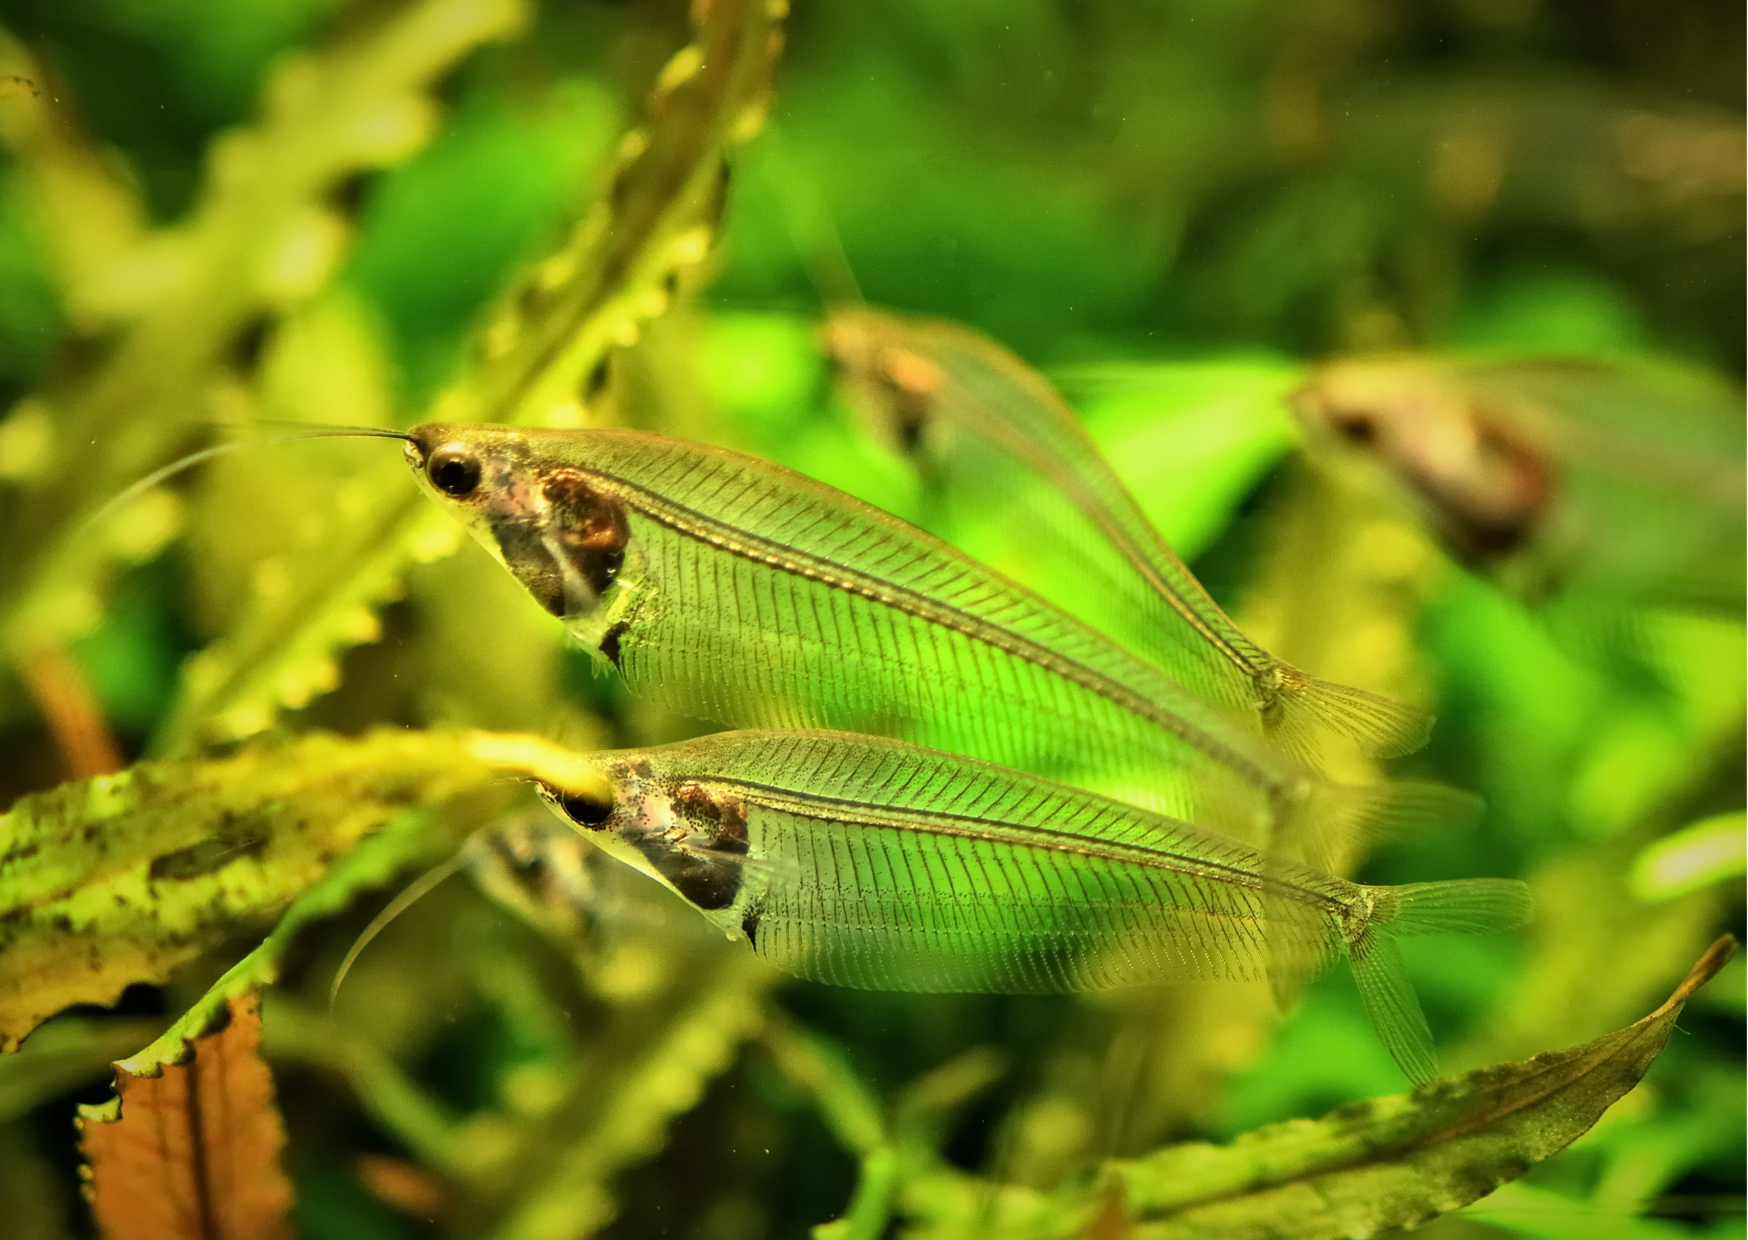 Did you know? Glass Catfish